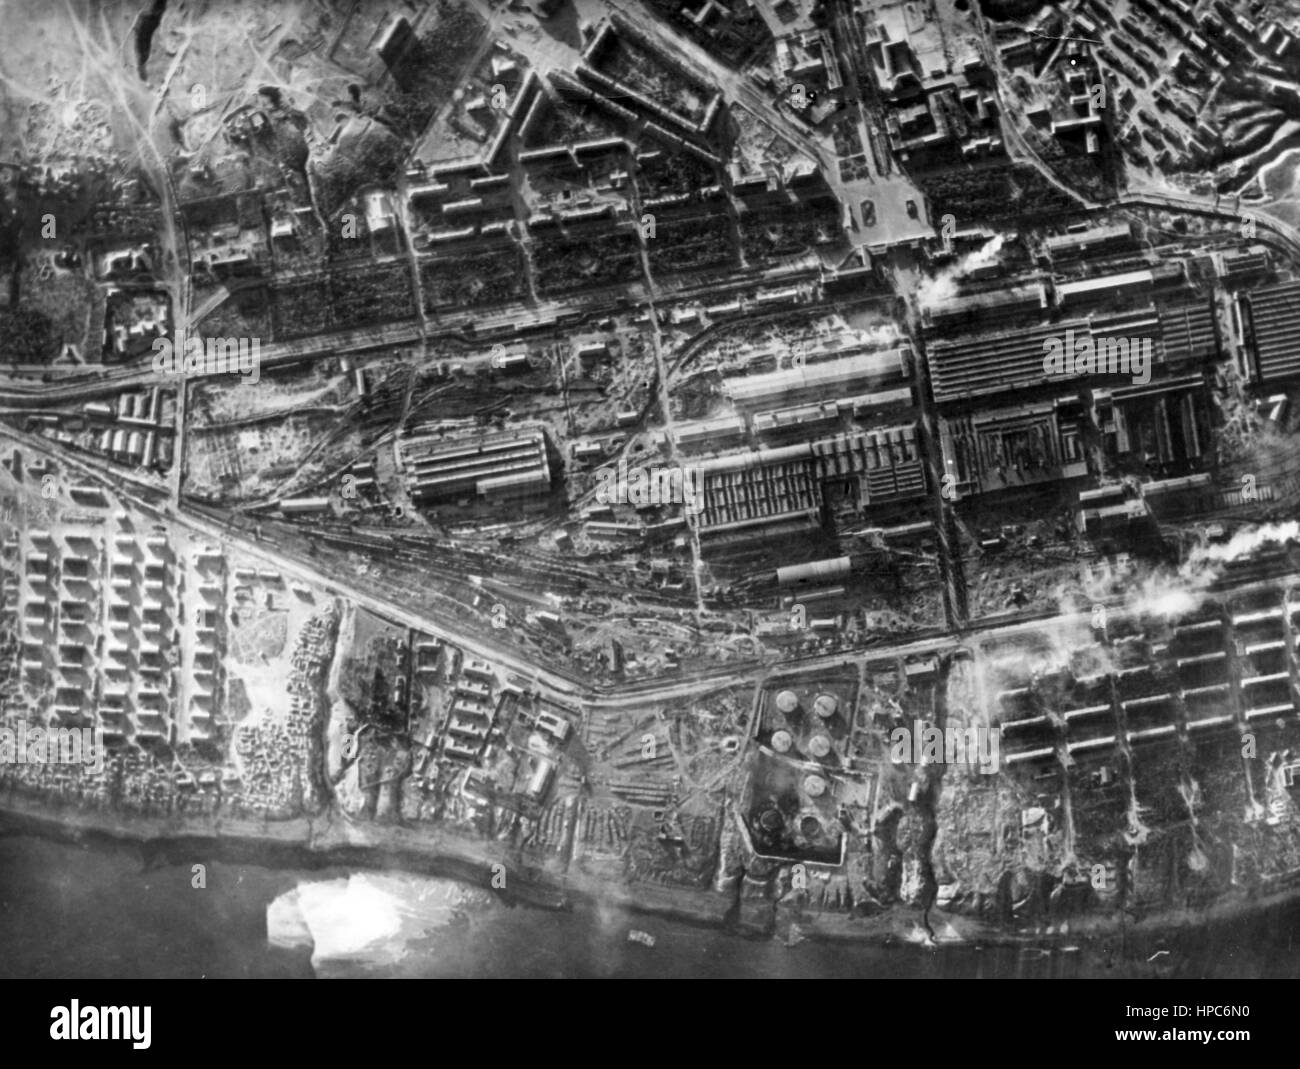 Aerial view on major tank factory Dzerzhinsky in Stalingrad, Soviet Union, released 17 October 1942. The original photography from which this digital image was made reads on its backside the national-socialistic propaganda 'Great tank factory Dzerzhinsky. One of the most important defence facilities of the Soviets in the fiercly fought-over Stalingrad was tractor factory Dzerzhinsky, which produced the finest Soviet tanks during times of peace and was turned into a factory for building tanks since outbreak of the war. The factory was turned into a massive bastion and was defended by the Bolshe Stock Photo